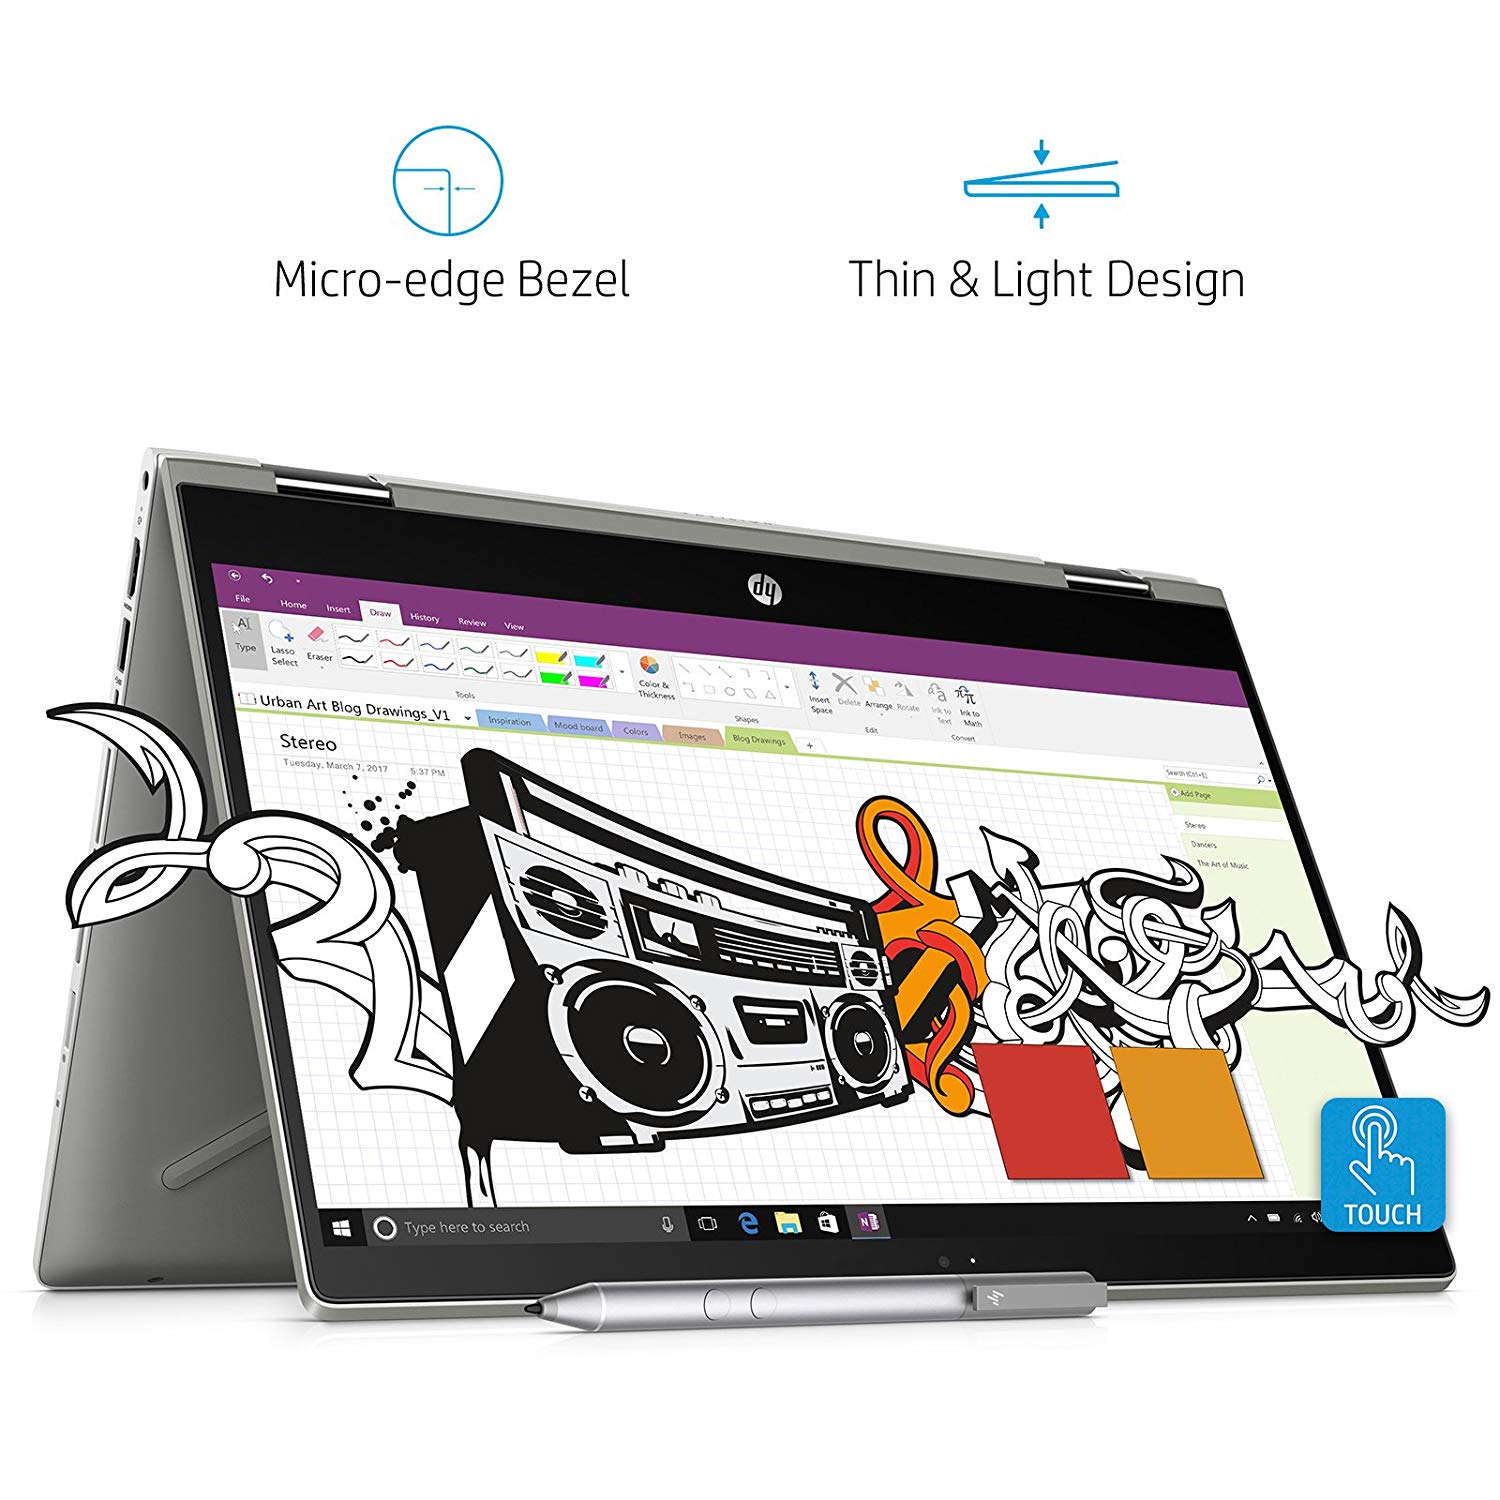 HP Pavilion x360 Intel Core i7 8th Gen 14-inch Touchscreen 2-in-1 FHD Thin and Light Laptop (12GB/512GB SSD/Windows 10 Home/MS Office/4GB Graphics/Mineral Silver/1.59 kg), cd0056TX